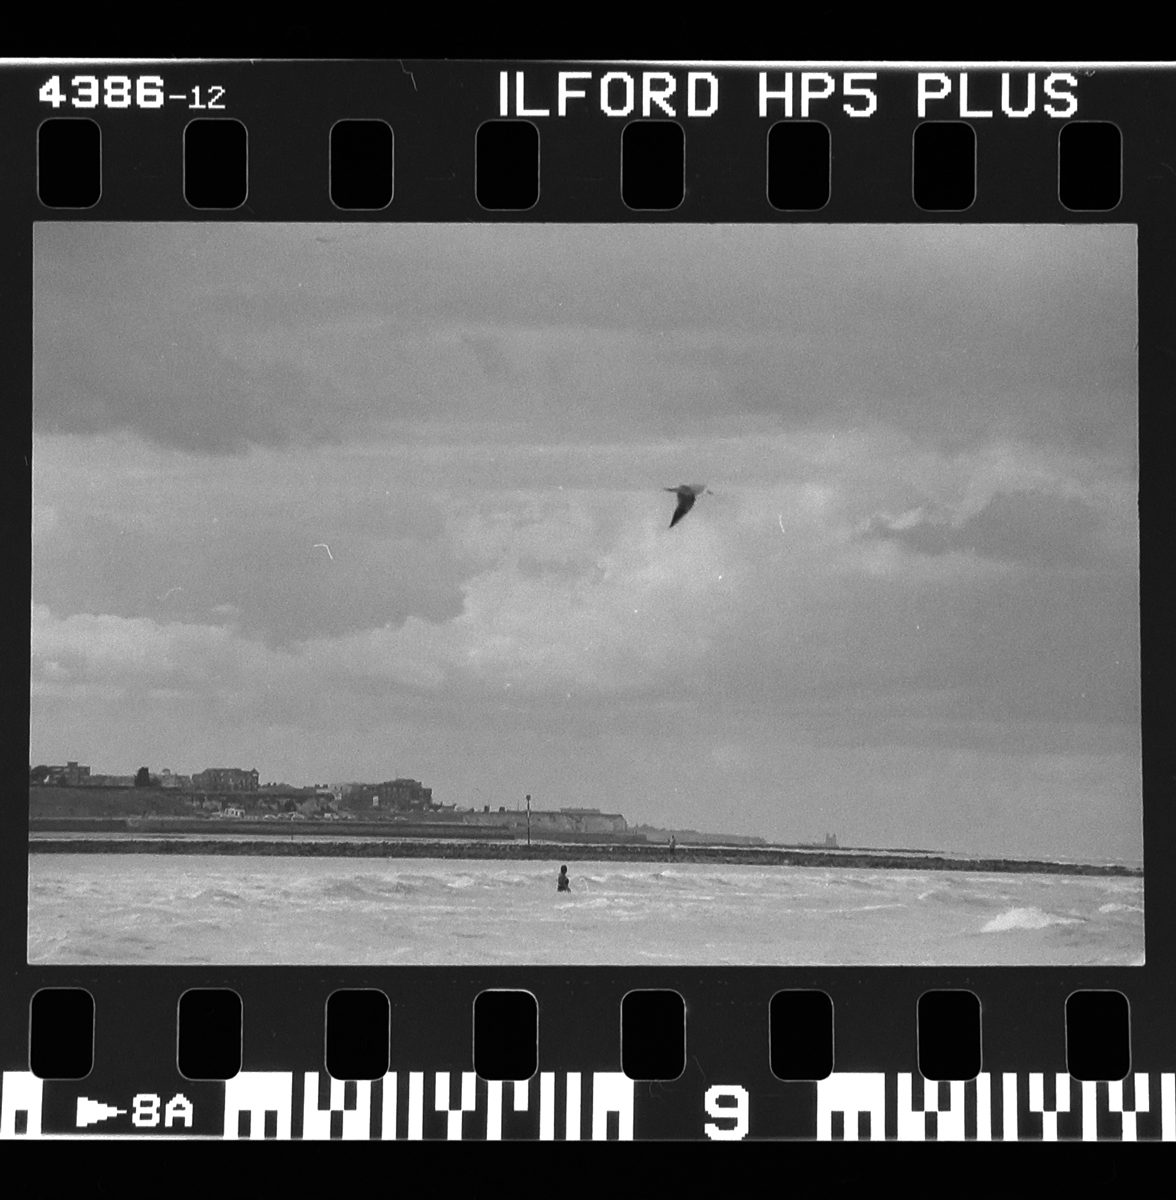 HP5+, exposed for the subject in the water – retained sky detail perfectly - Simon King